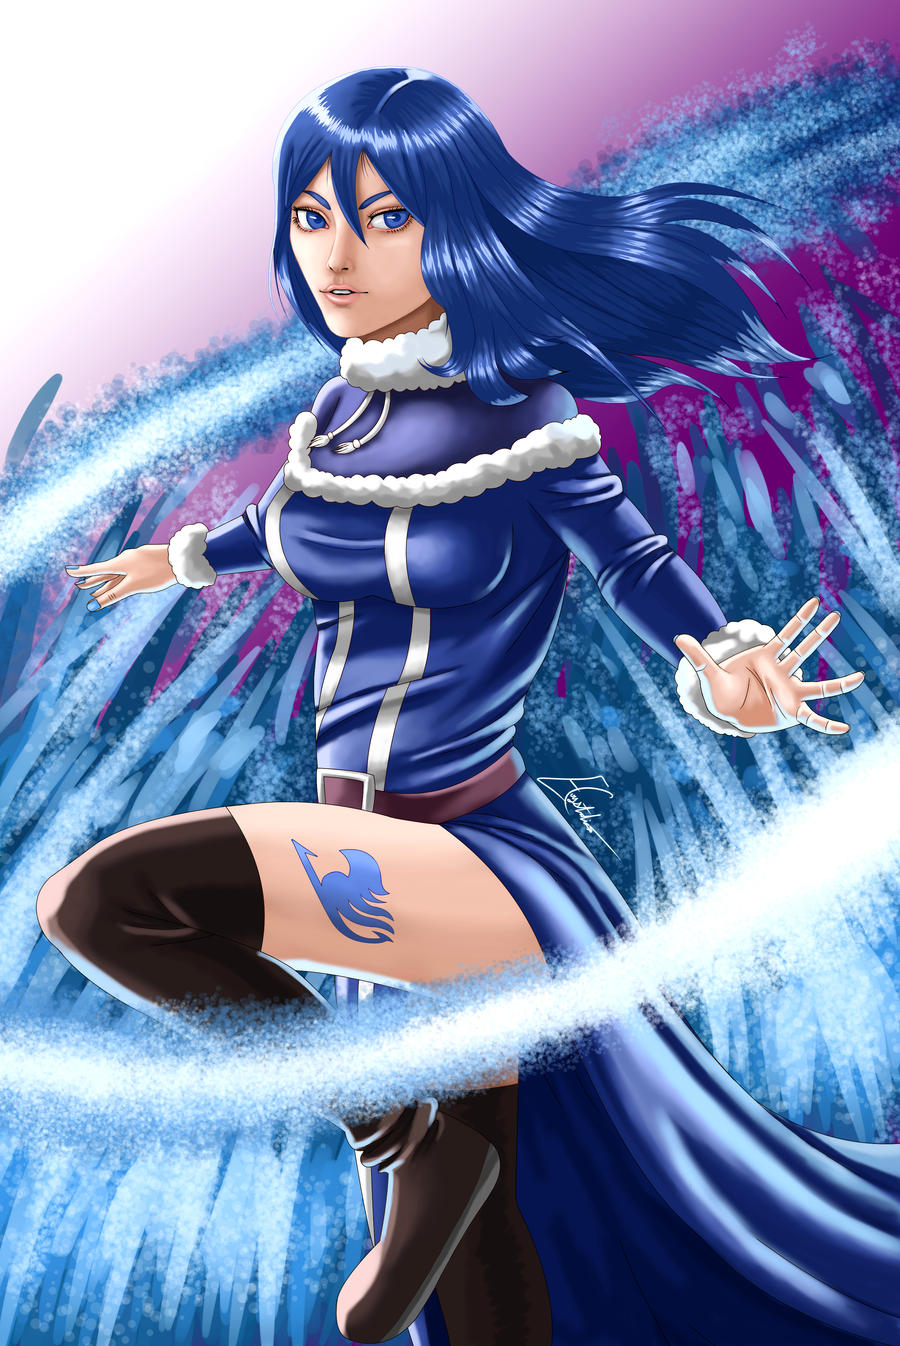 Juvia the Water Mage by ECrystalica on DeviantArt